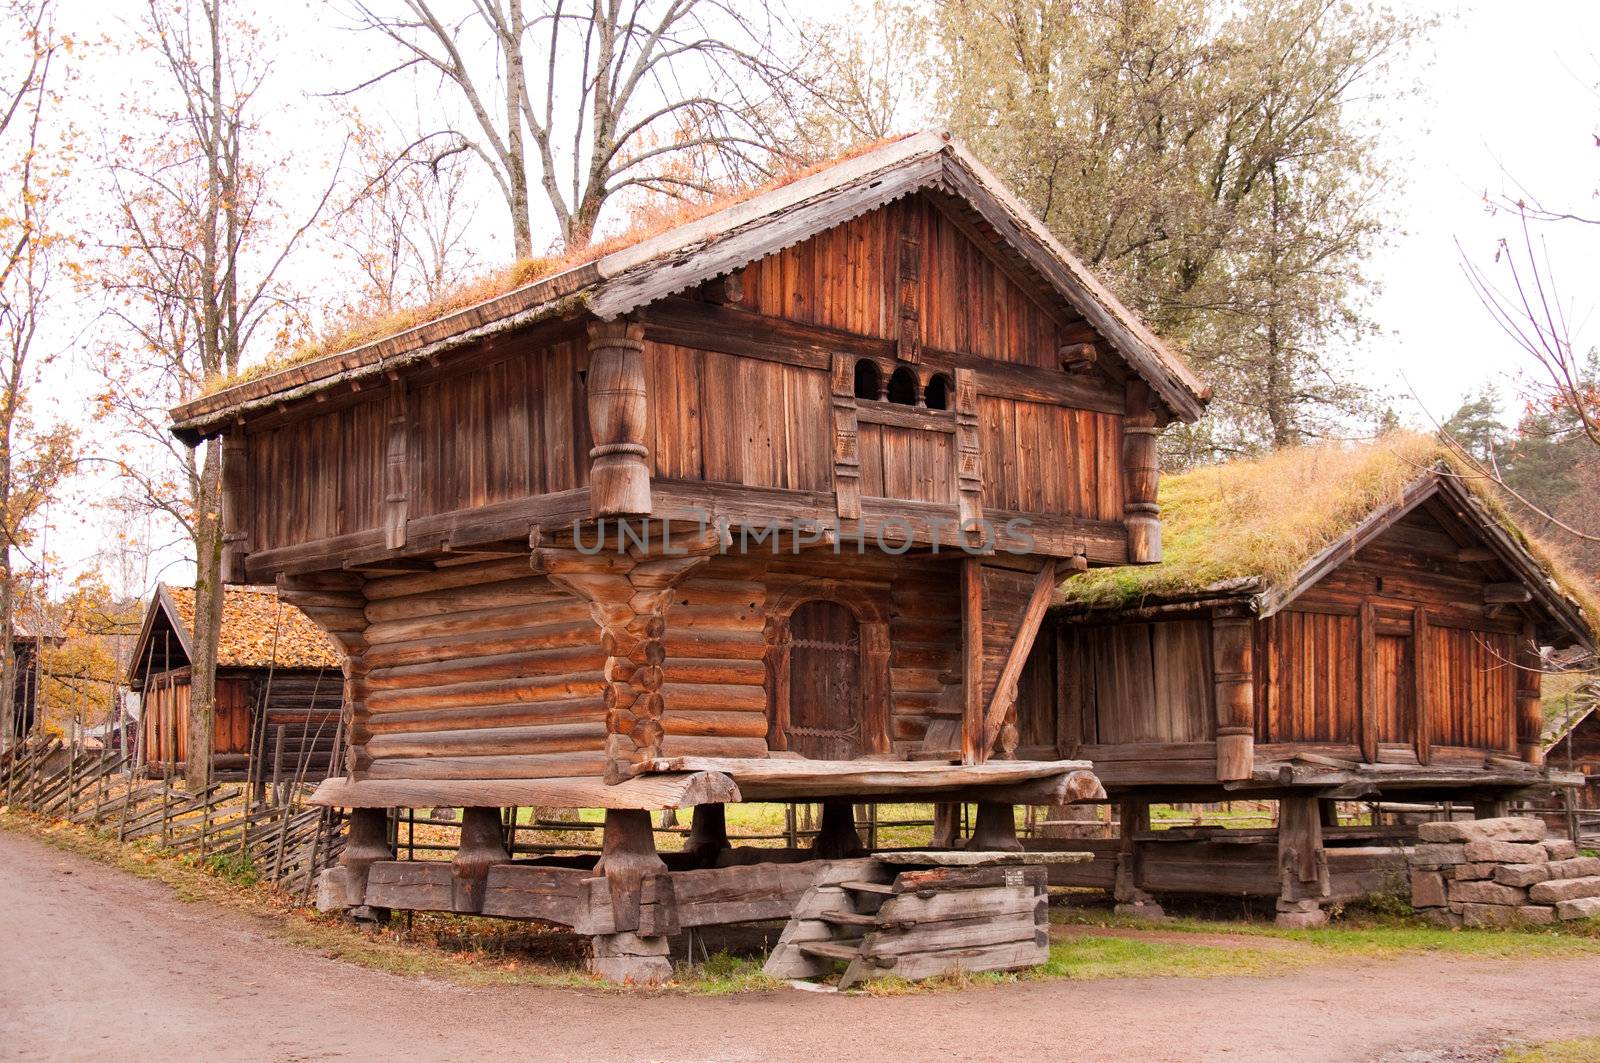 Norwegian typical wooden house by Nanisimova